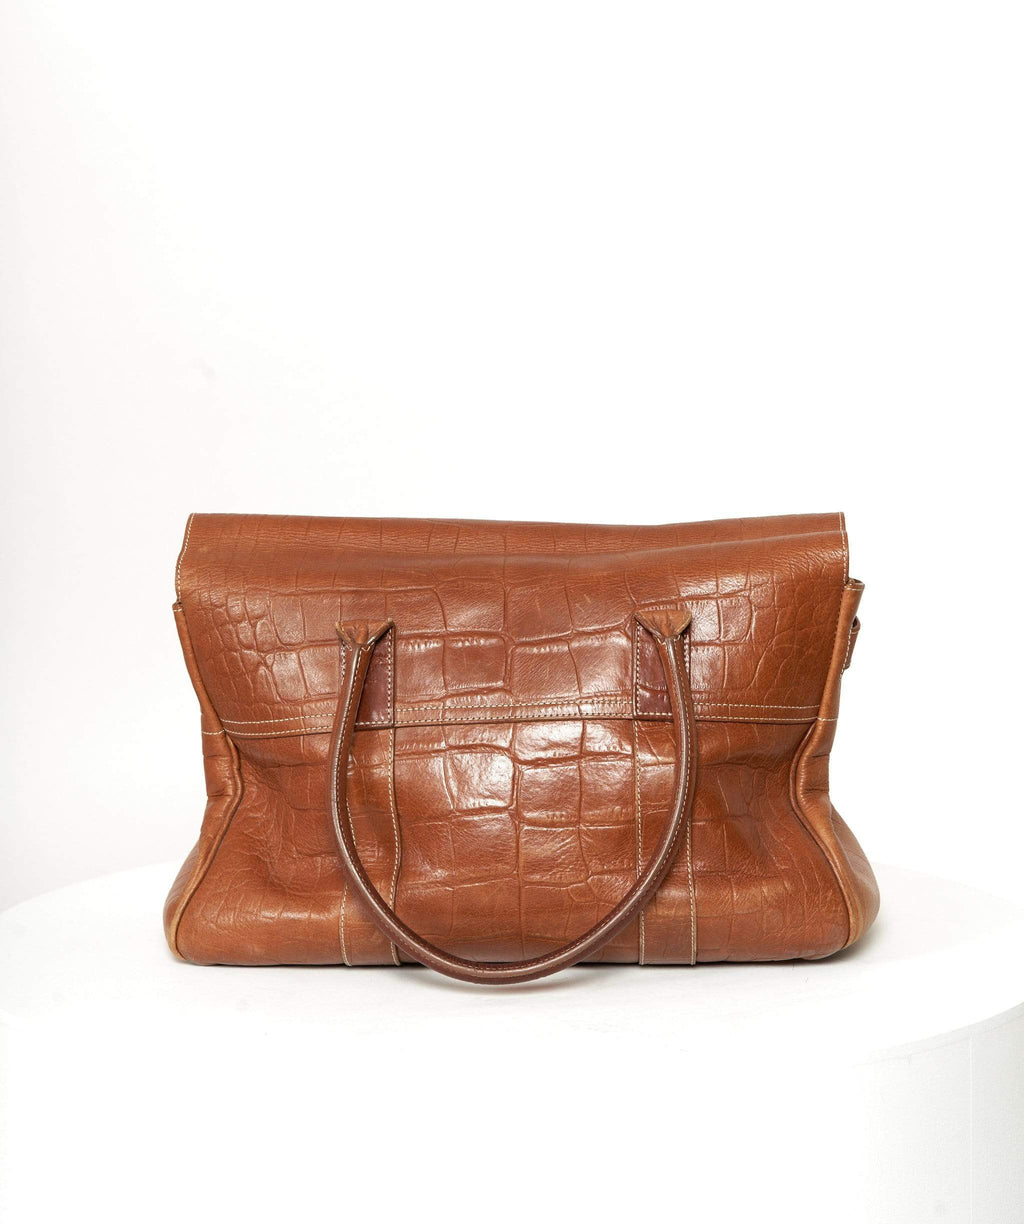 MULBERRY BAYSWATER BAG, chocolate brown leather with crocodile embossed,  brass bottom feet and hardware, double top handles, suede lining, 38cm x  26cm H x 16cm.